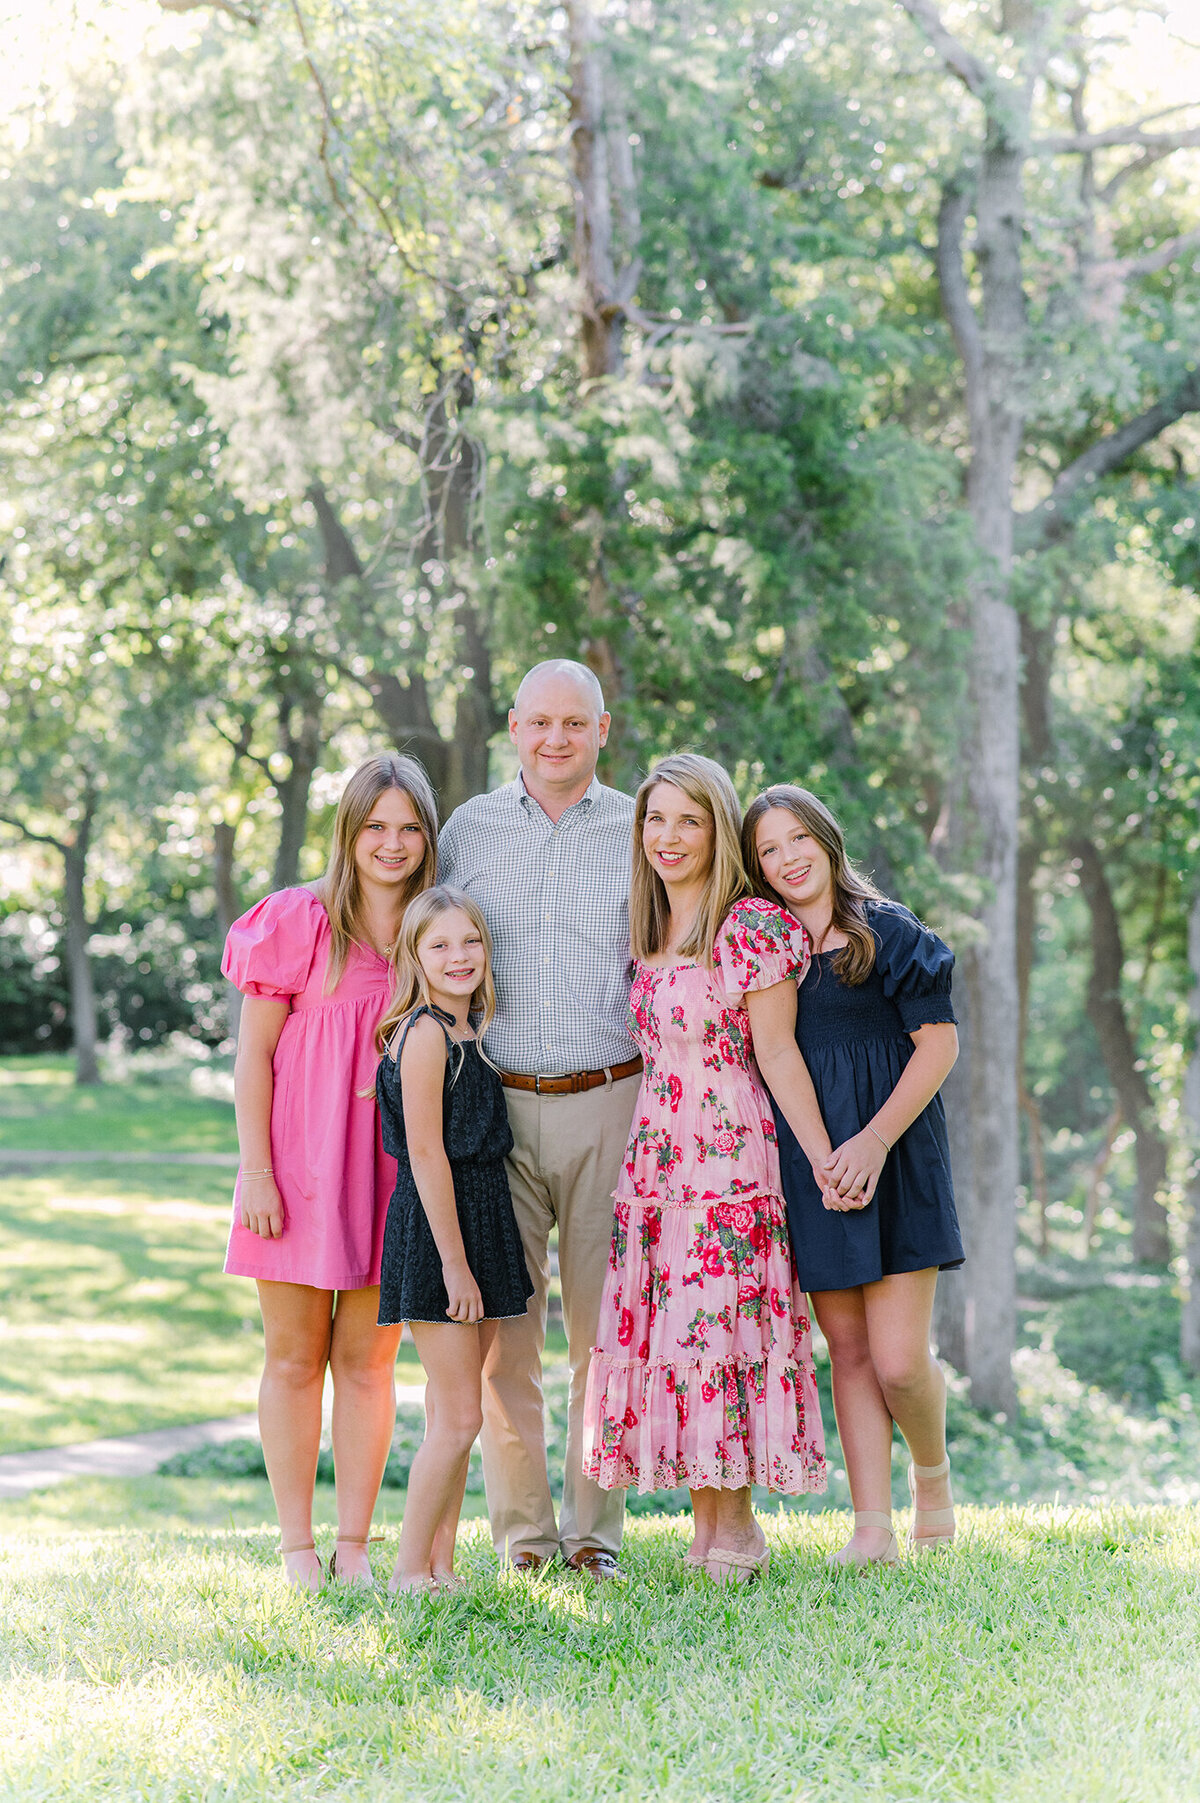 Family of five standing in a park with coordinating pink and navy clothing.